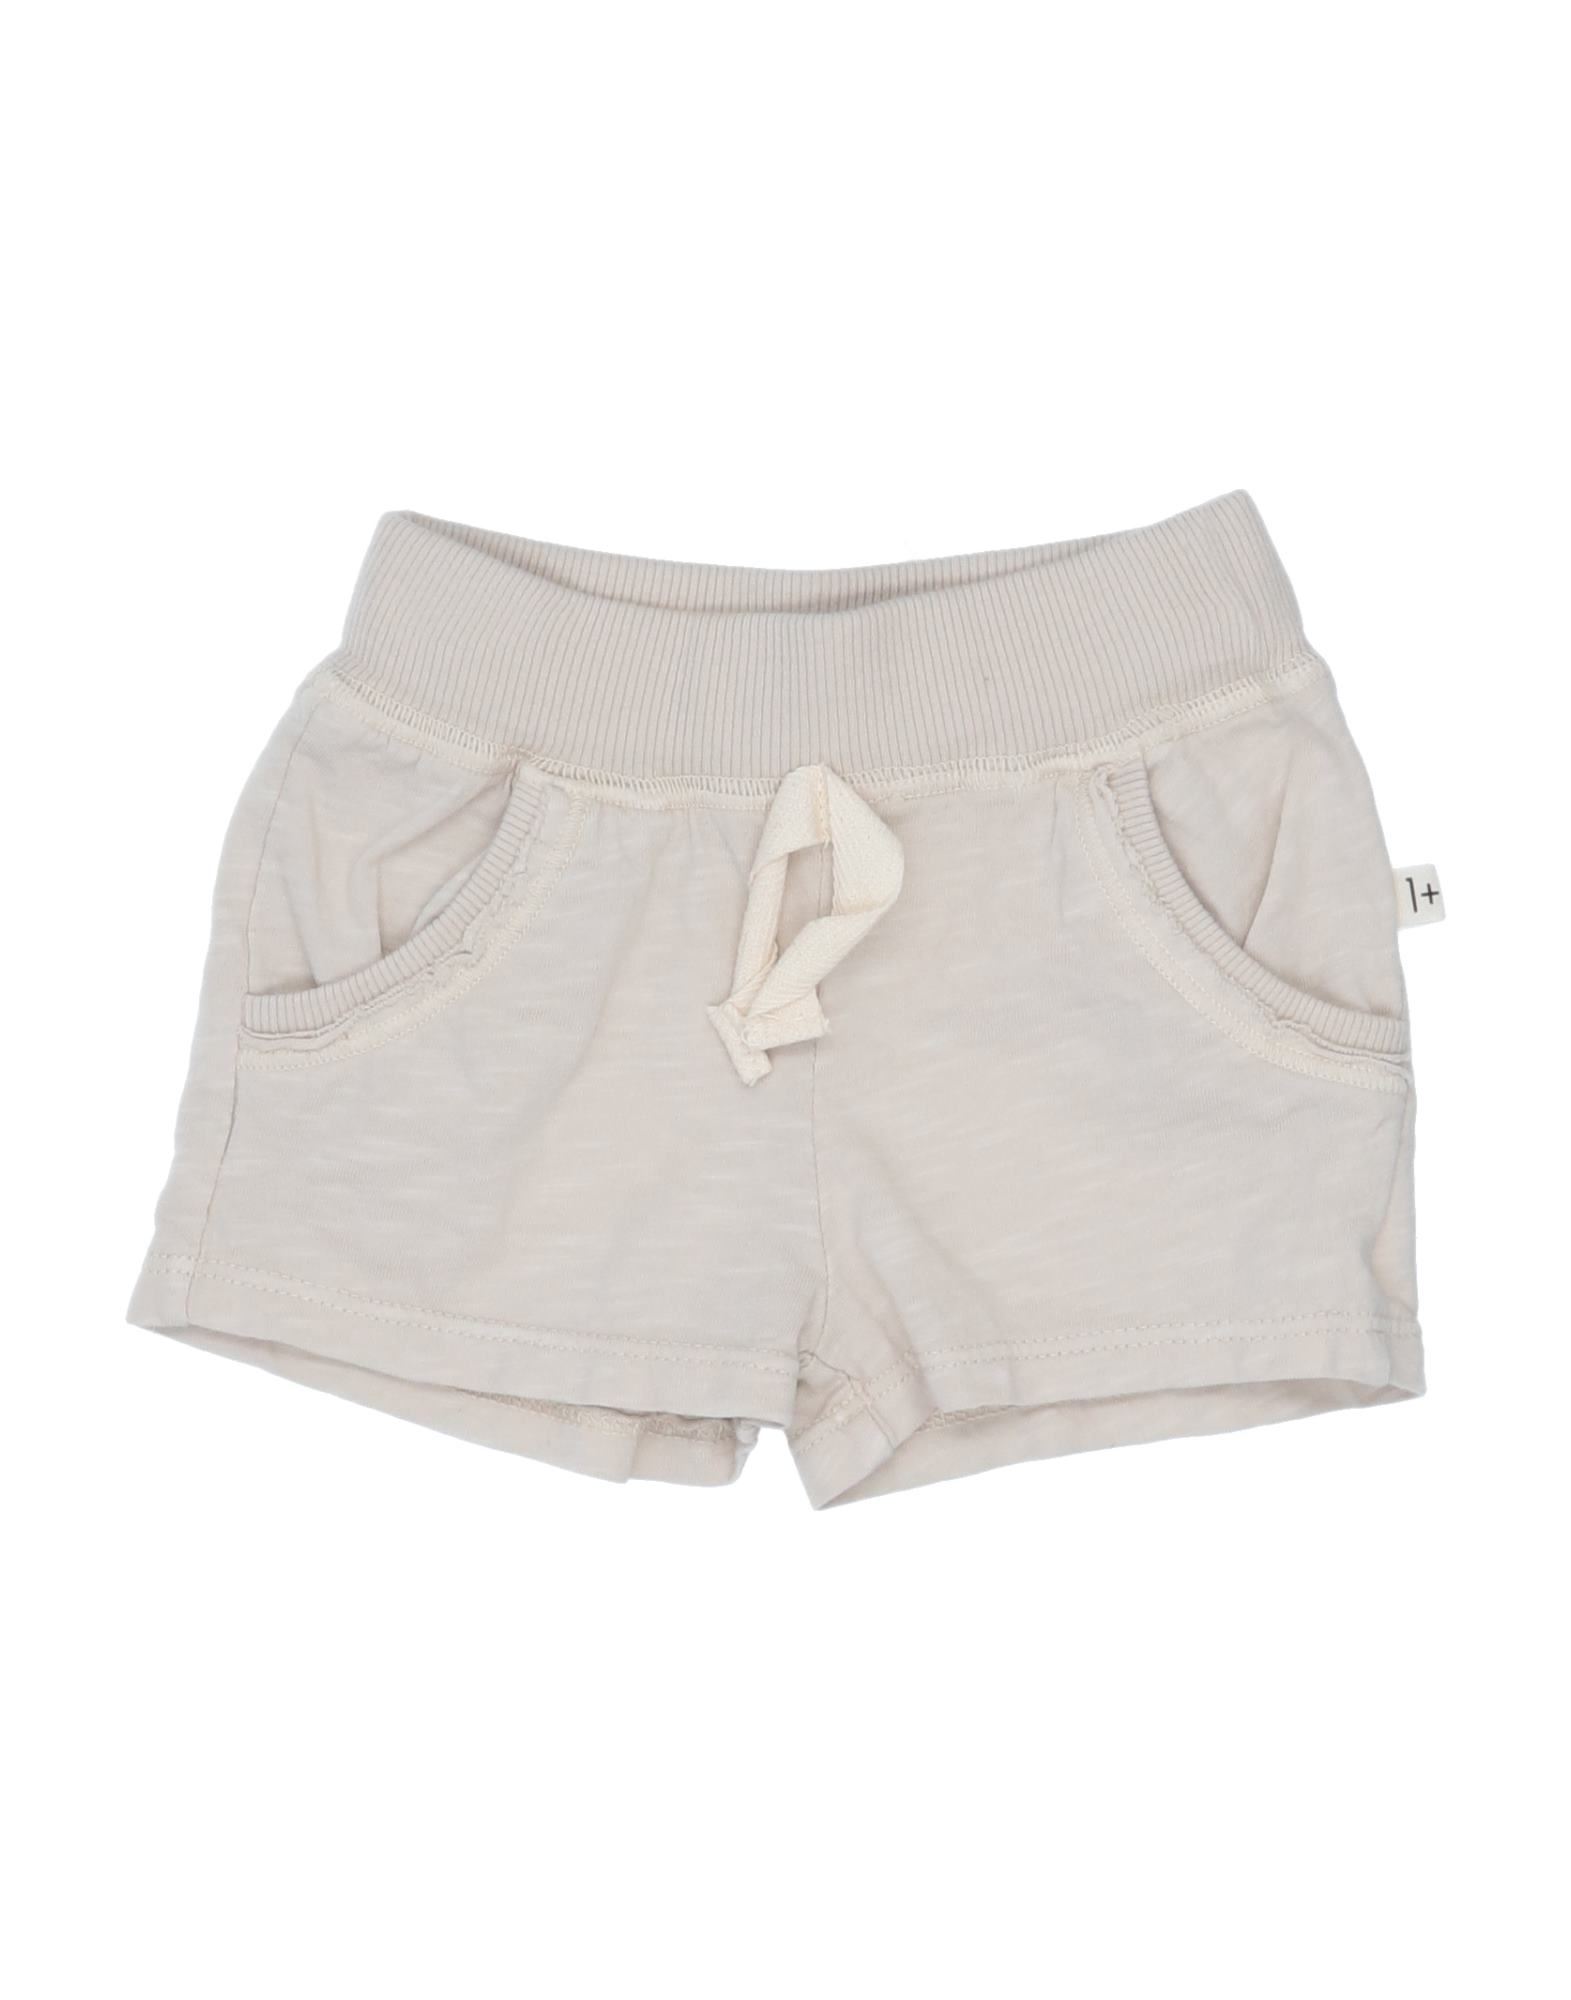 1+ In The Family Kids' 1 + In The Family Newborn Girl Shorts & Bermuda Shorts Beige Size 3 Cotton